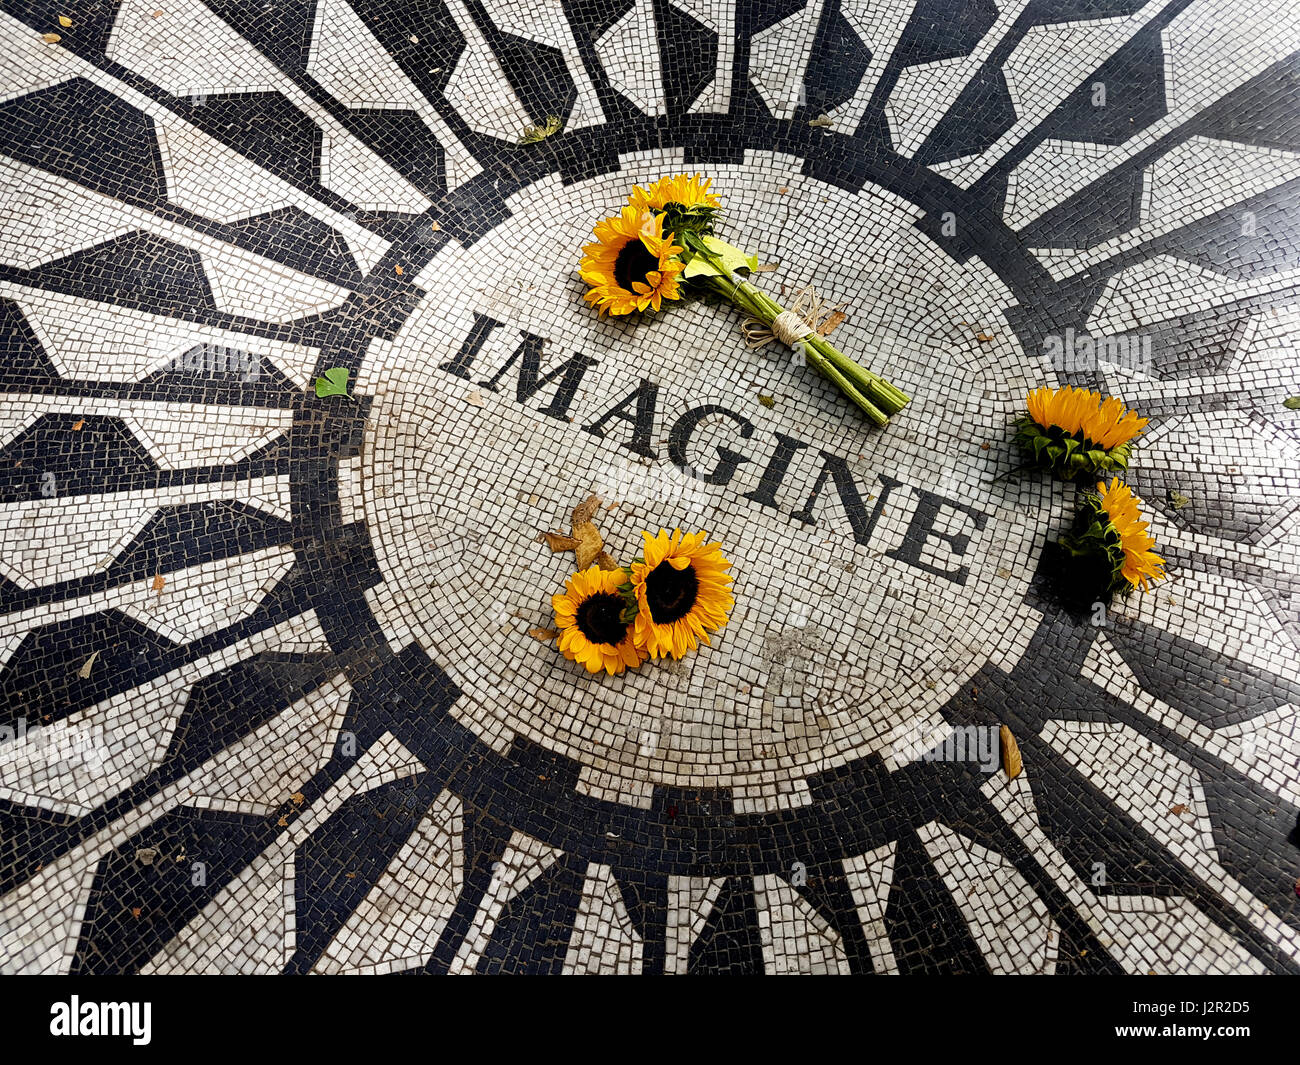 NEW, YORK USA - September 11, 2016: The Imagine mosaic with sunflowers at Strawberry Fields in Central Park, Manhattan Stock Photo